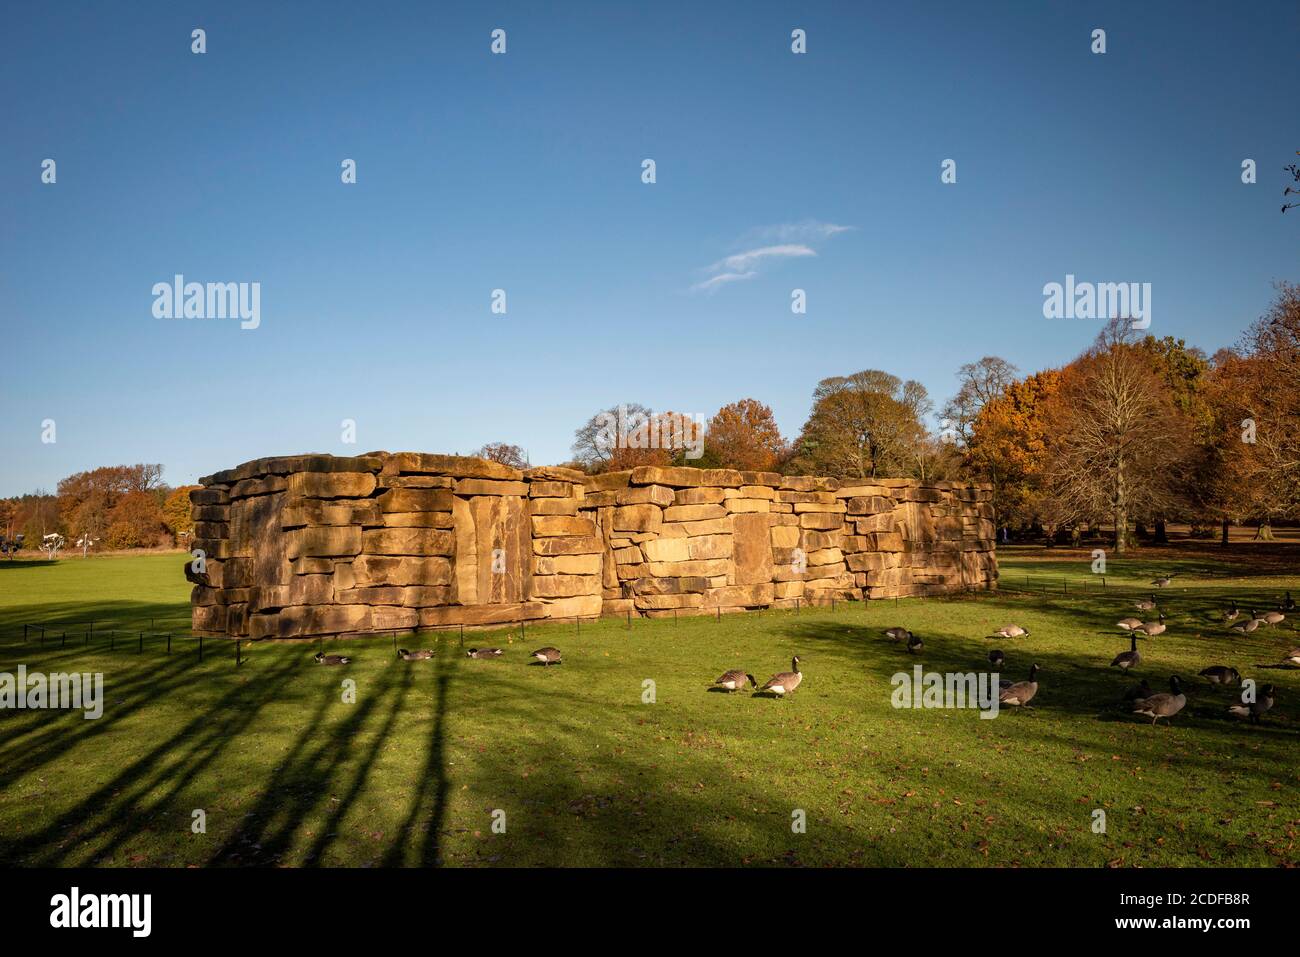 'Wall Dale Cubed' sculpture by the artist Sean Scully at Yorkshire Sculpture Park near Wakefield, Yorkshire, UK Stock Photo